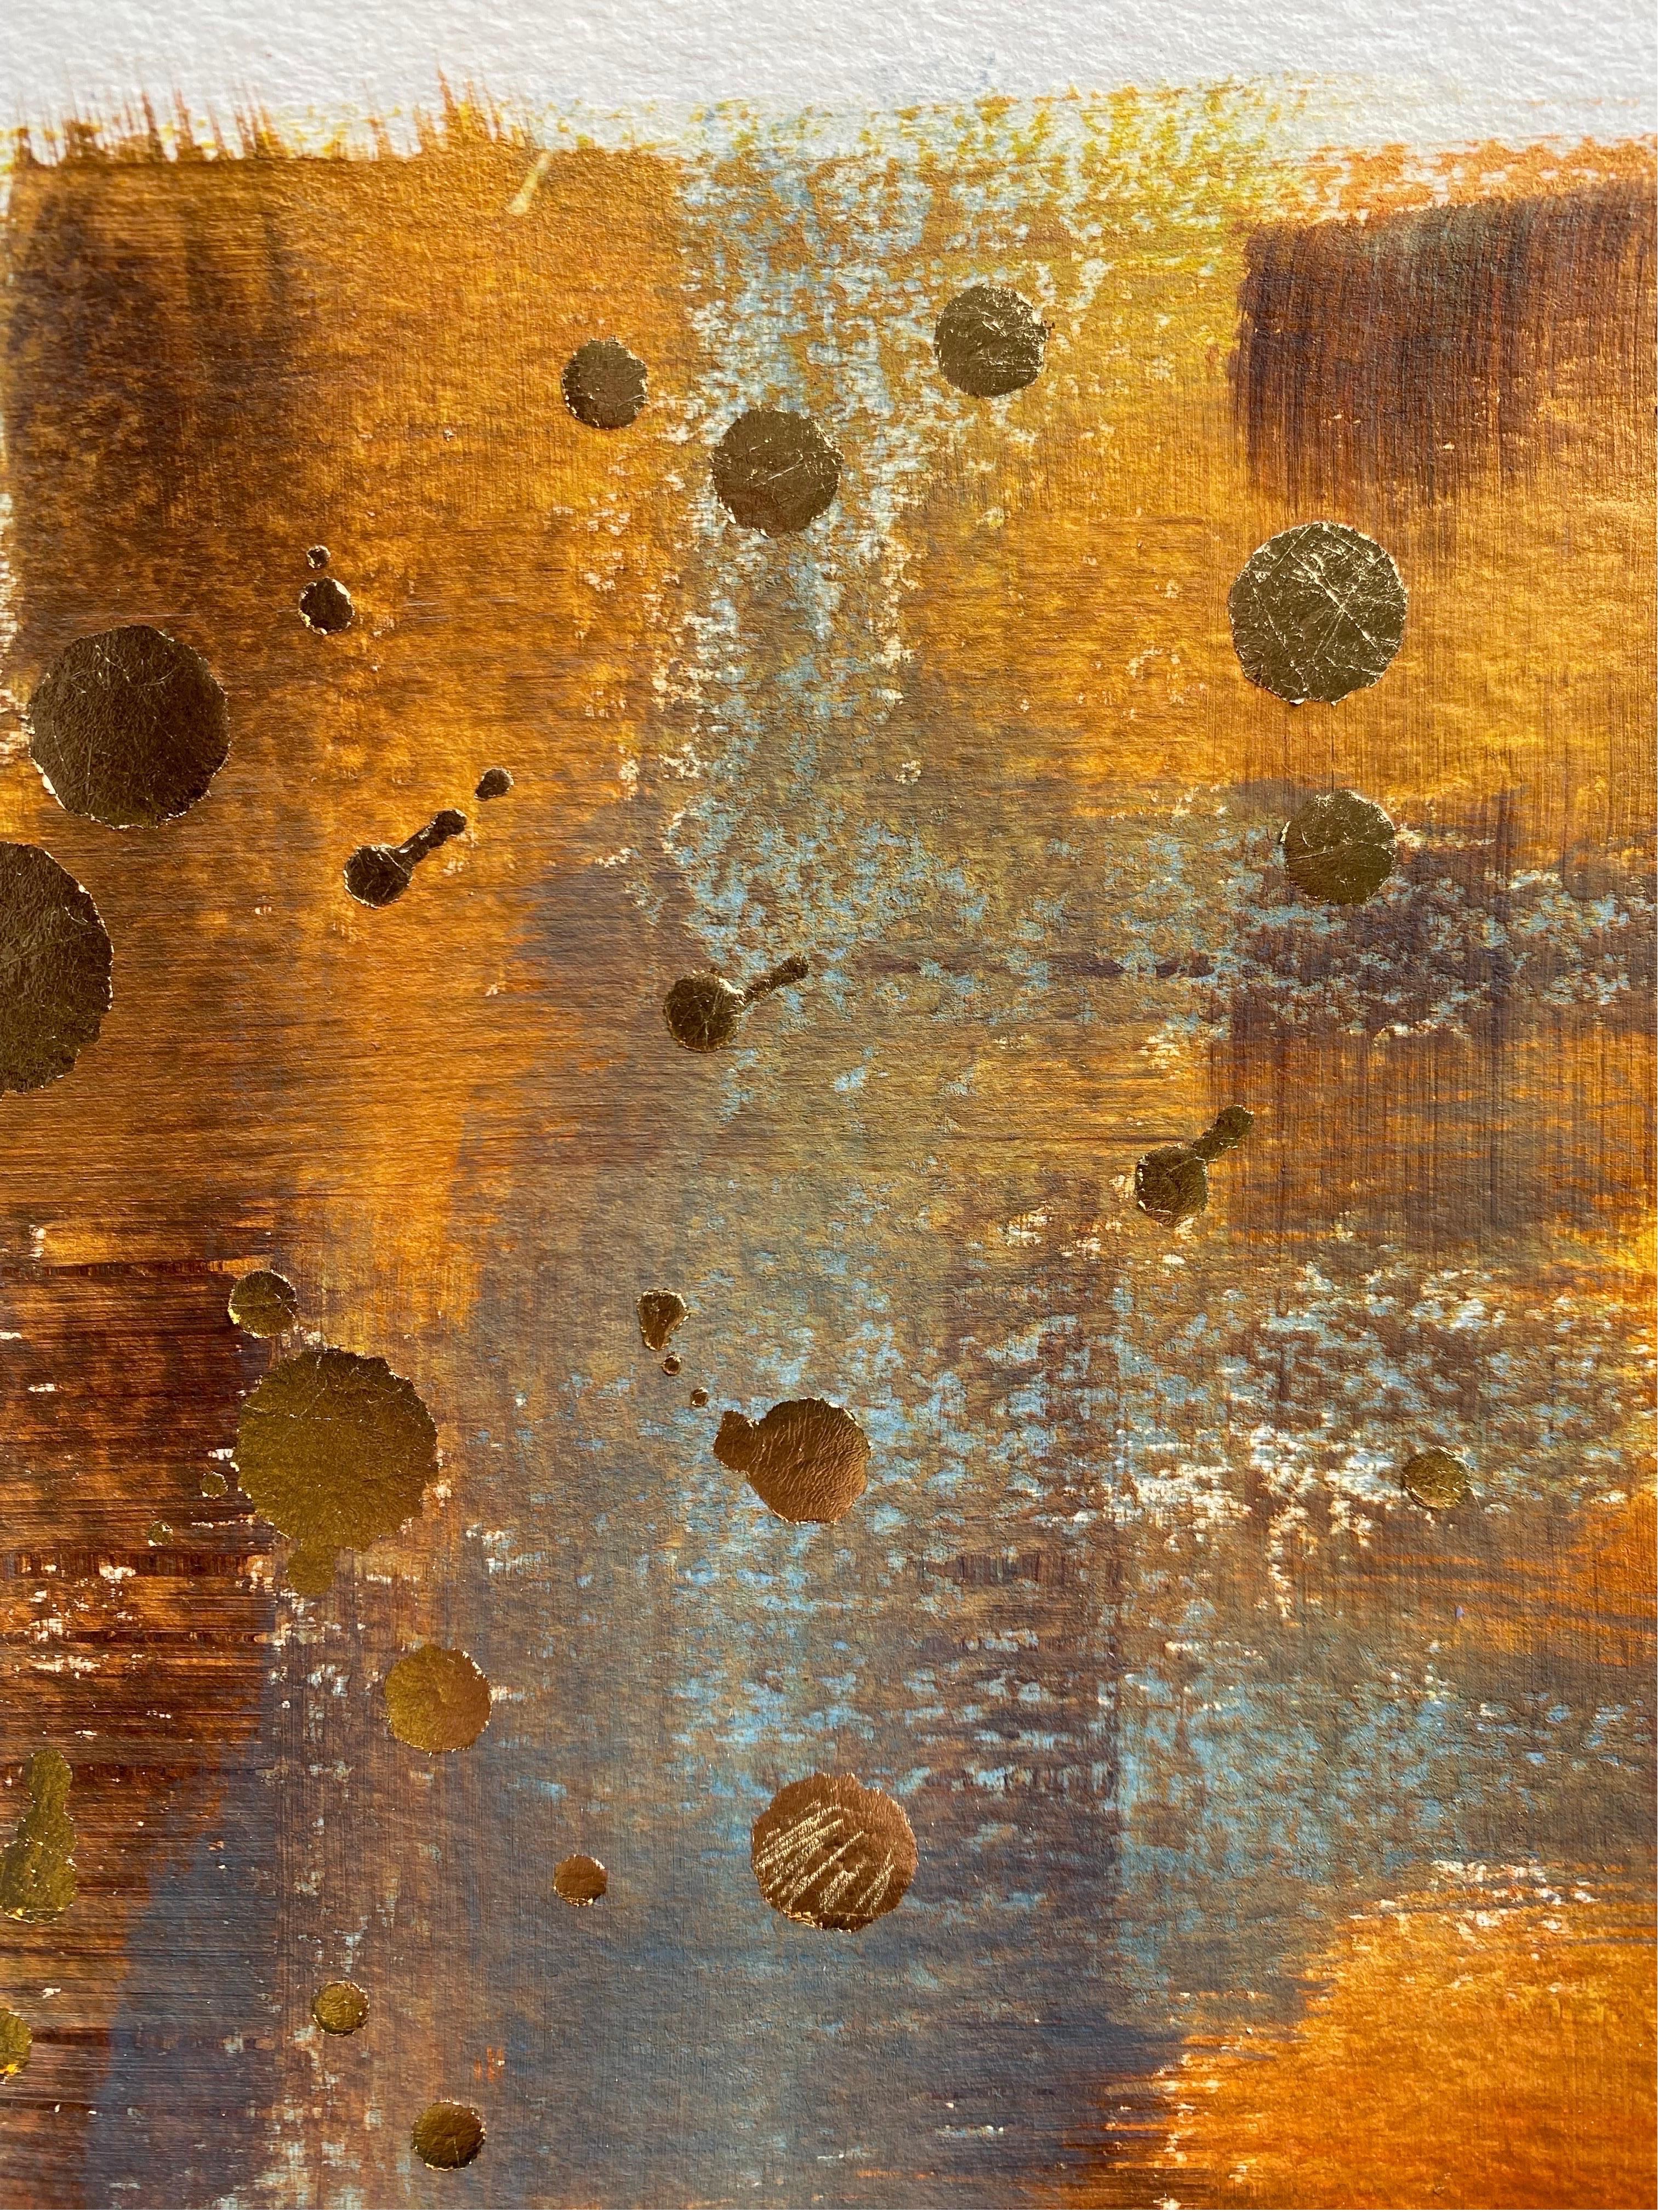 Original-Across the Universe-abstract-gold leaf-UK Awarded Artist-Work on paper 4